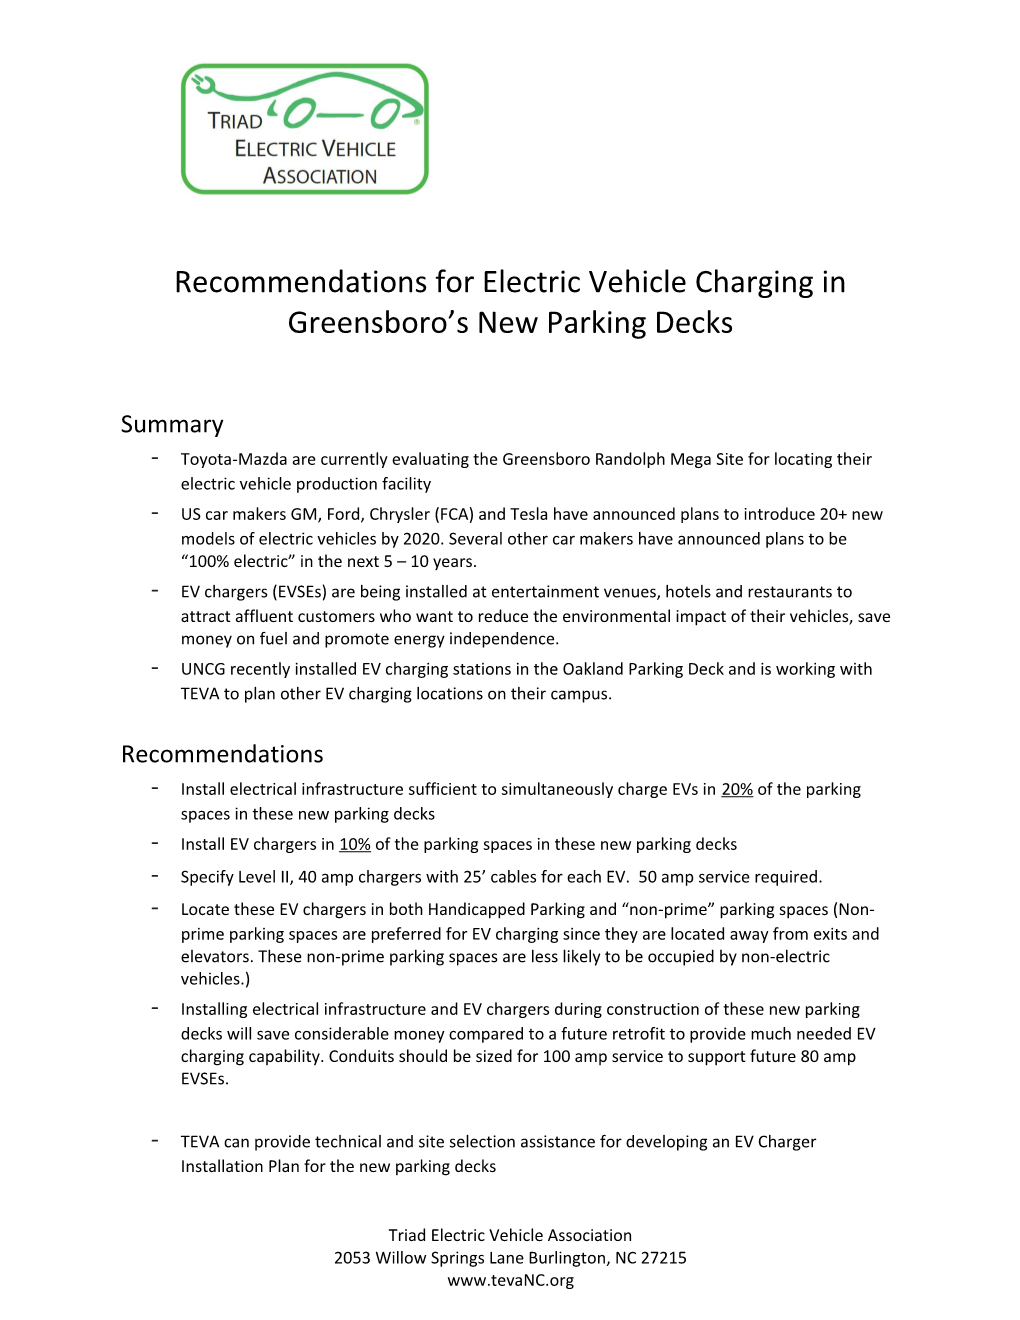 Recommendations for Electric Vehicle Charging in Greensboro S New Parking Decks